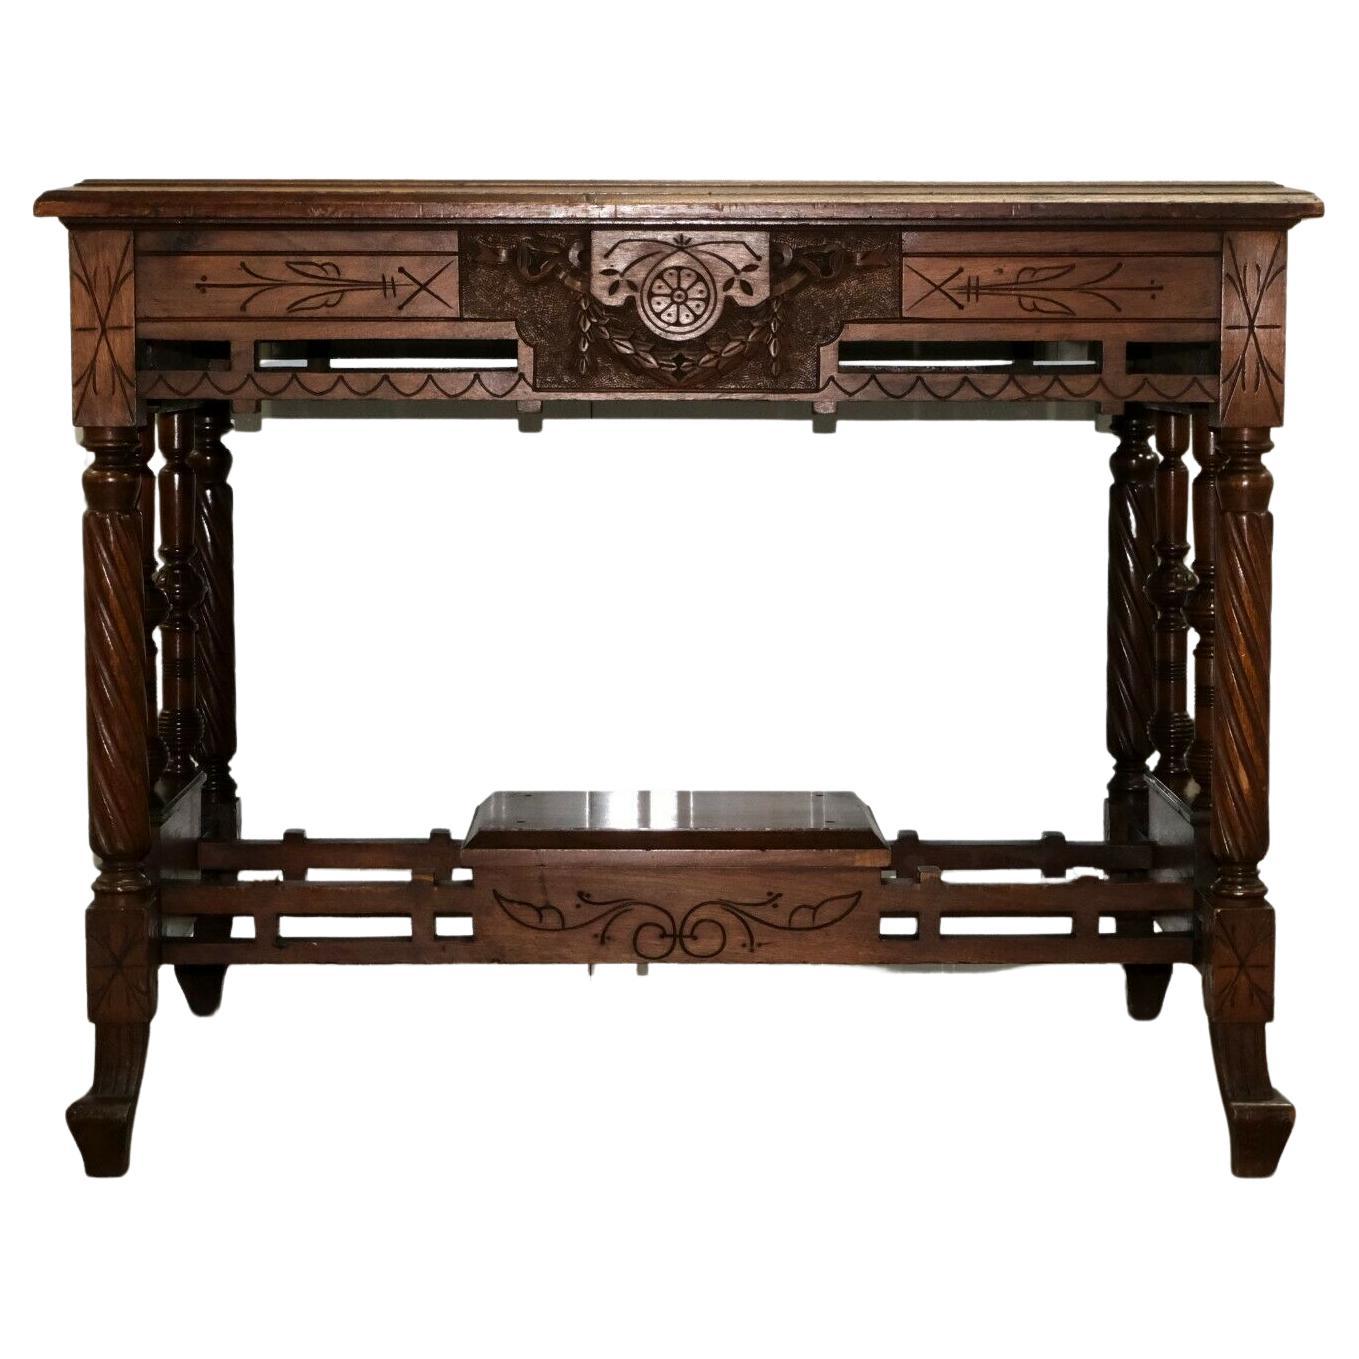 We are delighted to offer for sale this charming 19th century carved walnut writing table with leather inset top.

This table has beautiful carvings all around, making it very elegant and eye catching for any room. The spiral fluted legs and